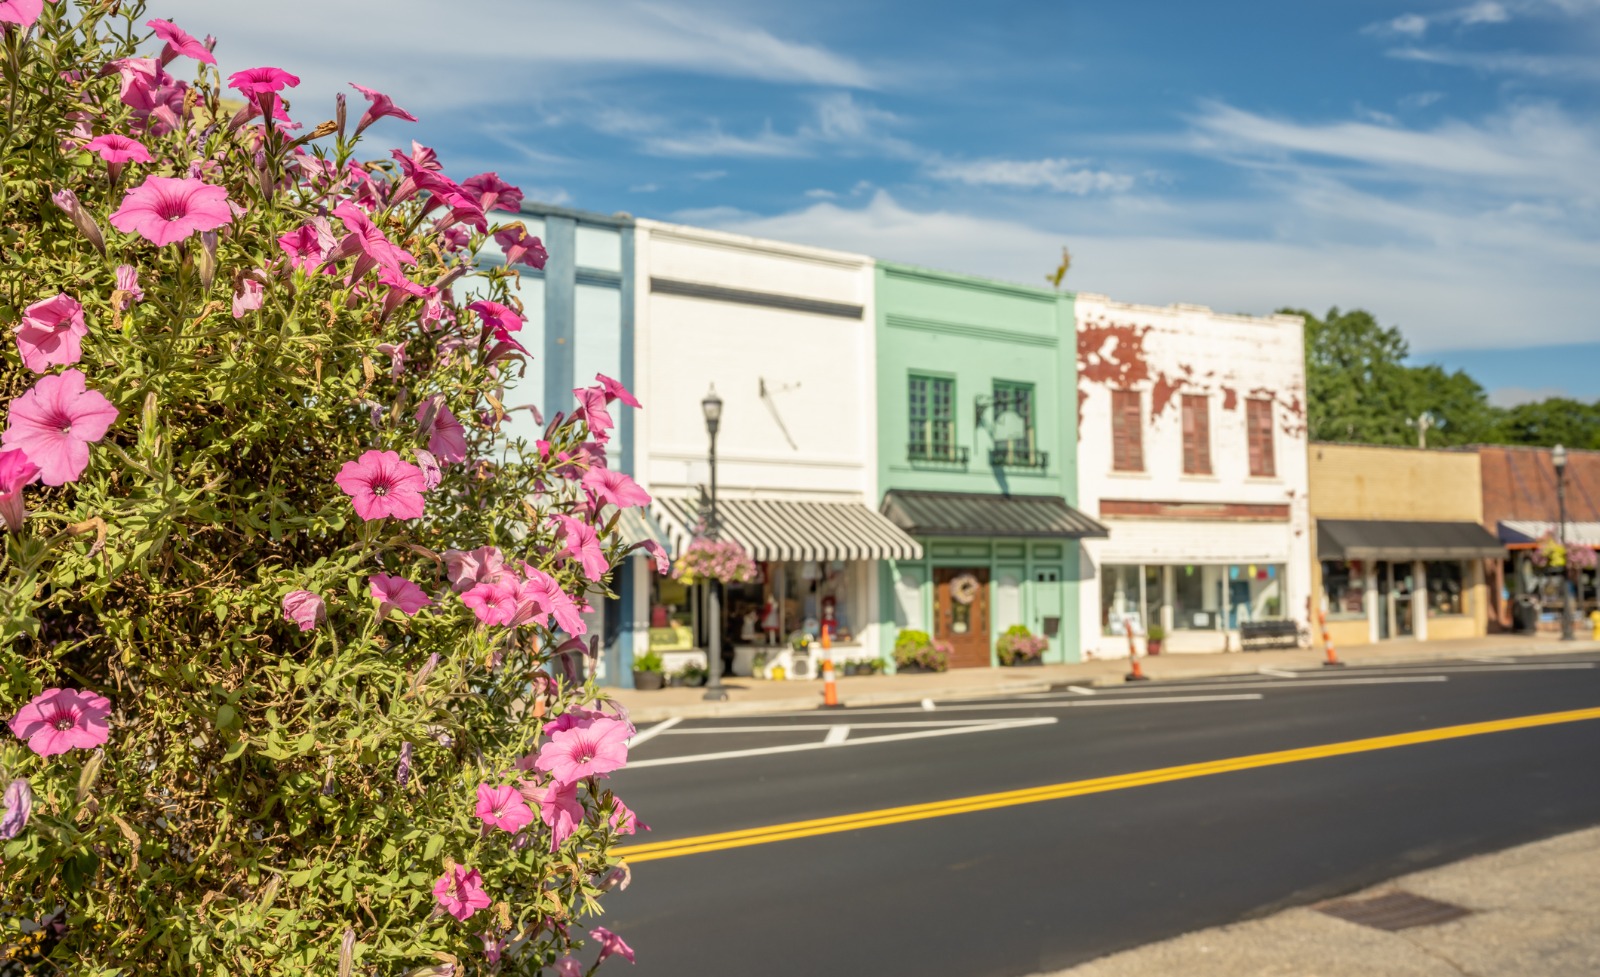 Small businesses in Inman South Carolina